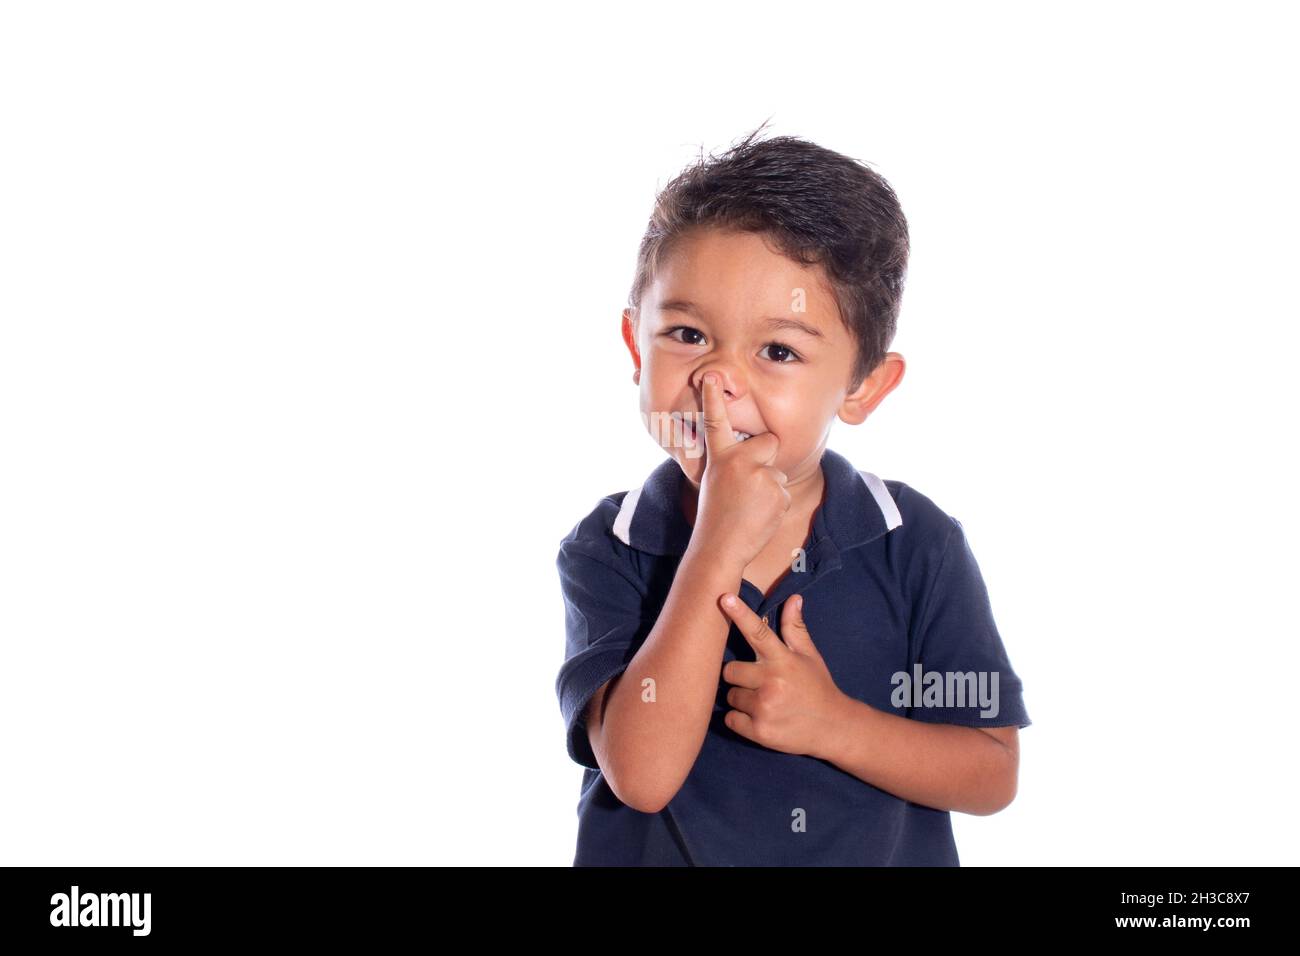 Embarrassed boy trying to pick his nose, isolated on white background. Latin child laughing while touching tip of his nose. Stock Photo